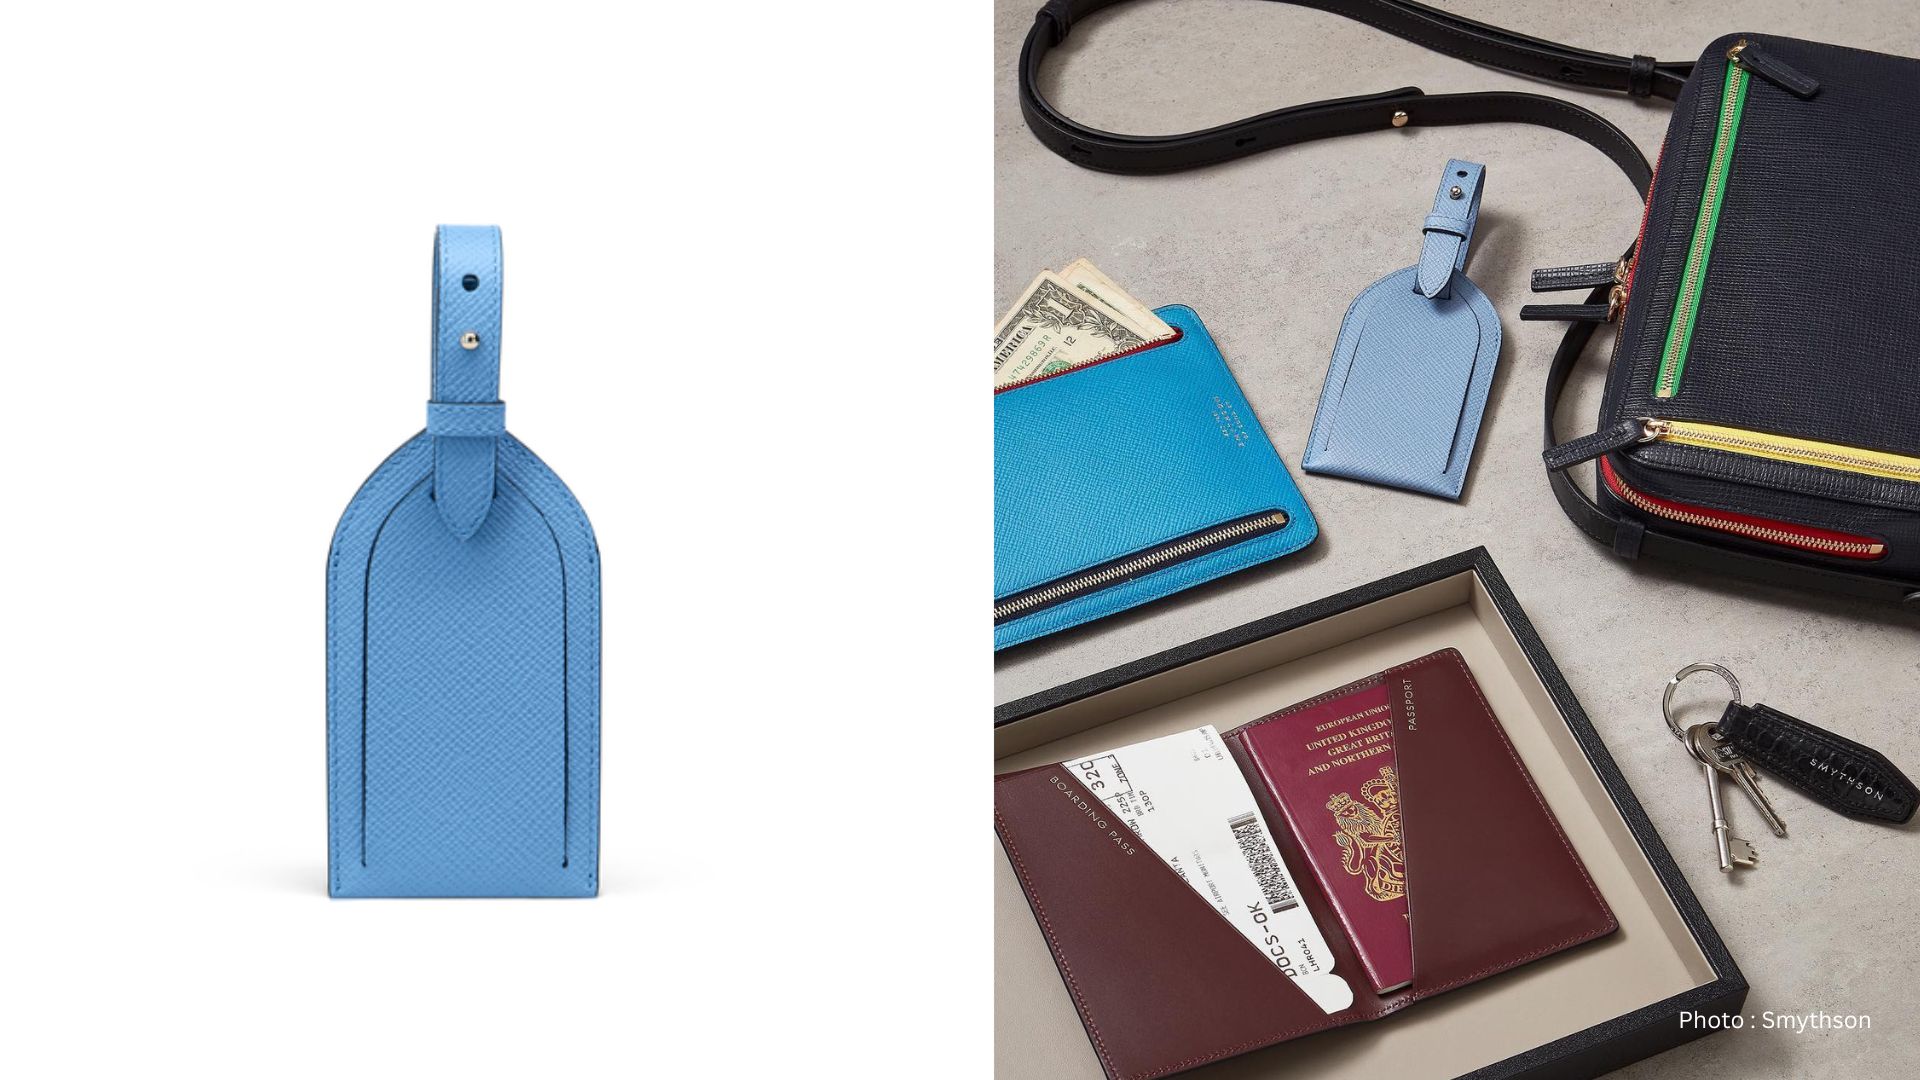 Travel in Style with Airbus 320 Leather Luggage Tags